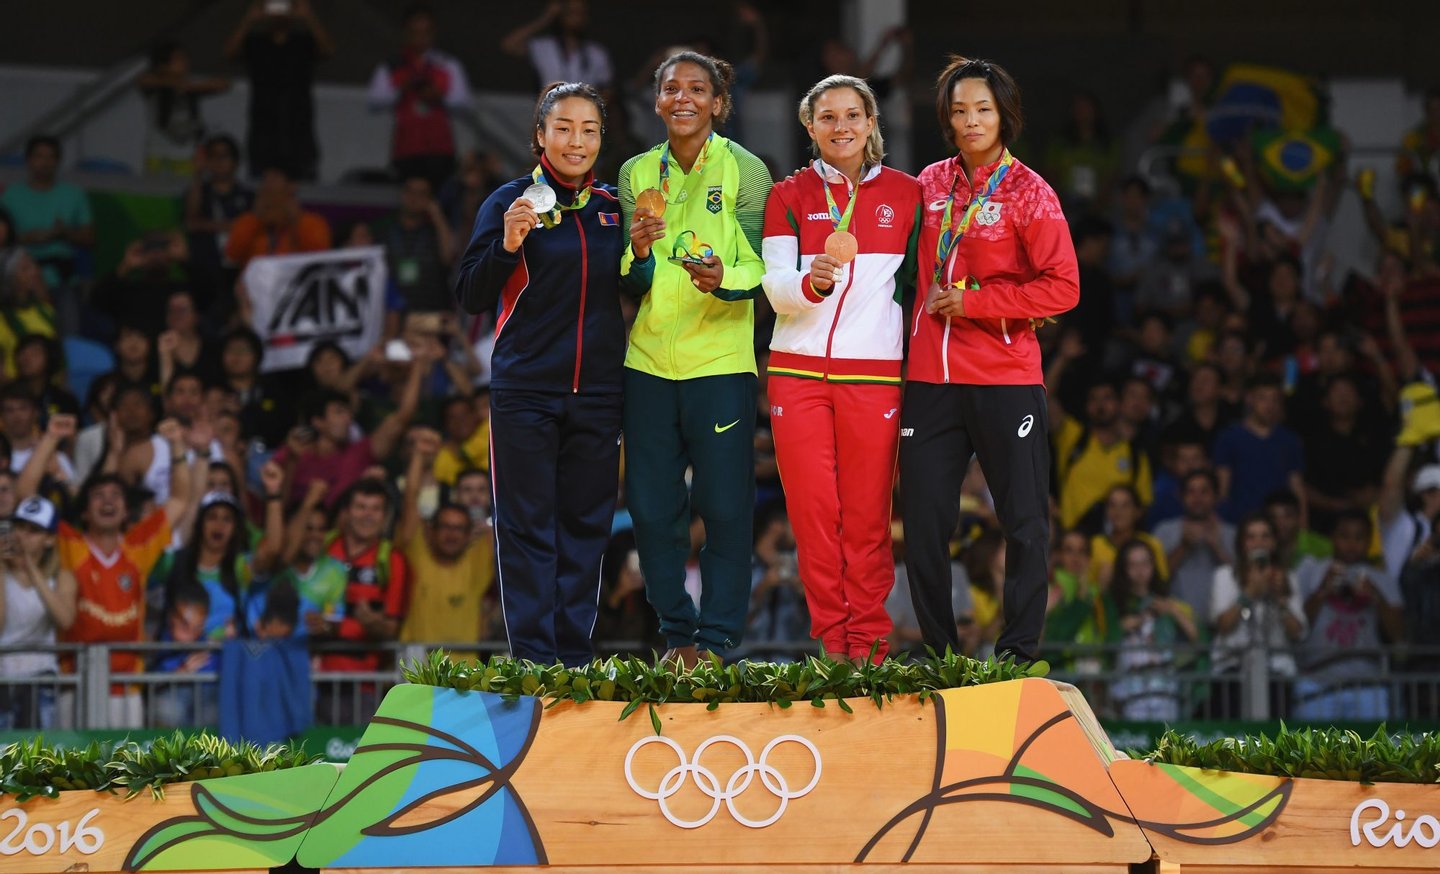 RIO DE JANEIRO, BRAZIL - AUGUST 08: Silver medalist Sumiya Dorjsuren of Mongolia, gold medalist Rafaela Silva of Brazil, bronze medalist Telma Monteiro of Portugal and bronze medalist Kaori Matsumoto of Japan celebrate on the podium after the Women's -57 kg Judo Contest on Day 3 of the Rio 2016 Olympic Games at Carioca Arena 2 on August 8, 2016 in Rio de Janeiro, Brazil. (Photo by David Ramos/Getty Images)